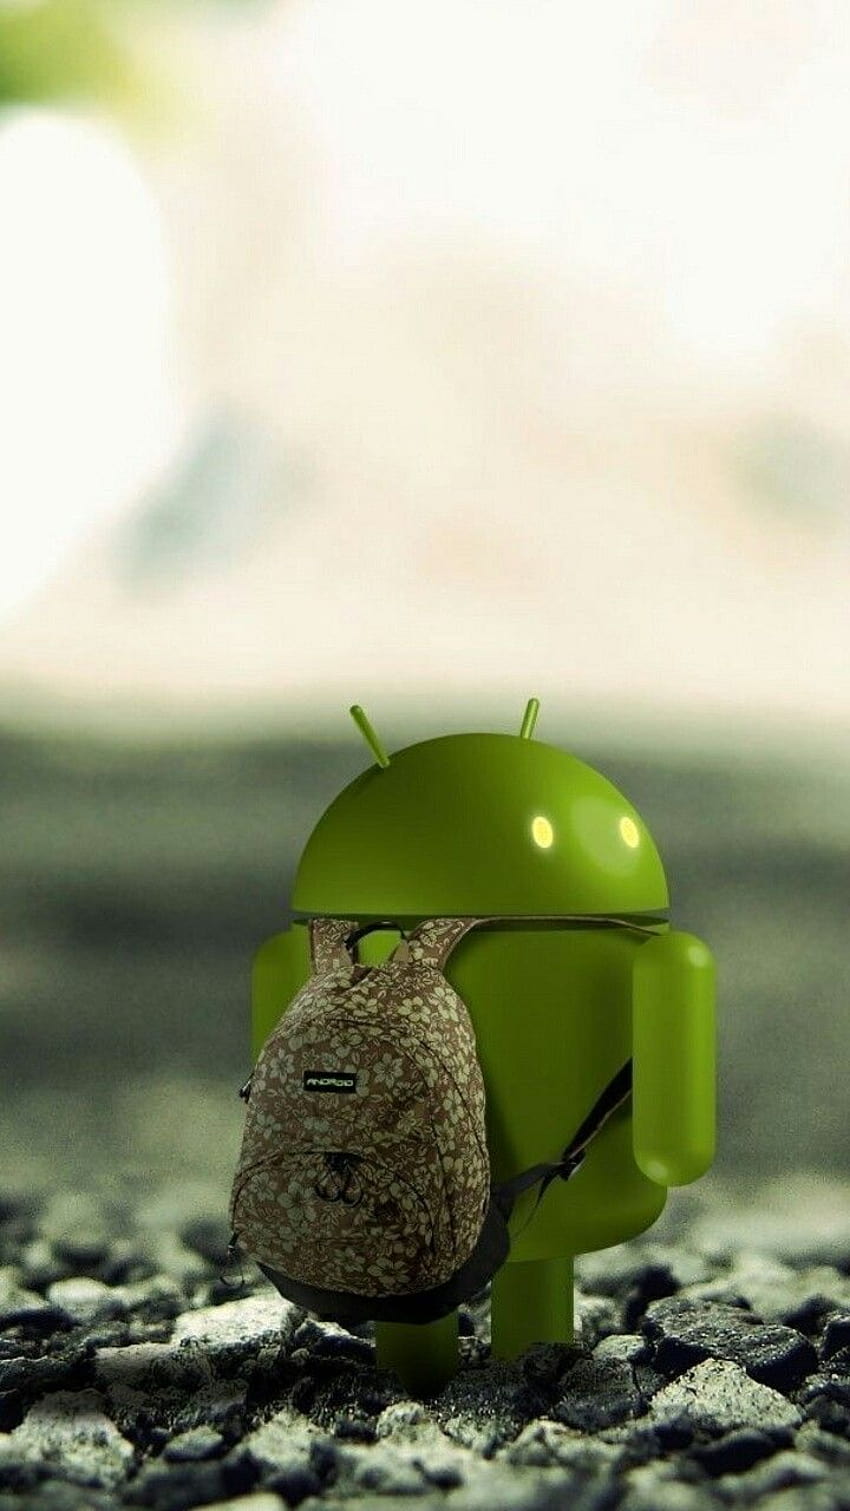 Pin on Android, green android robot HD phone wallpaper